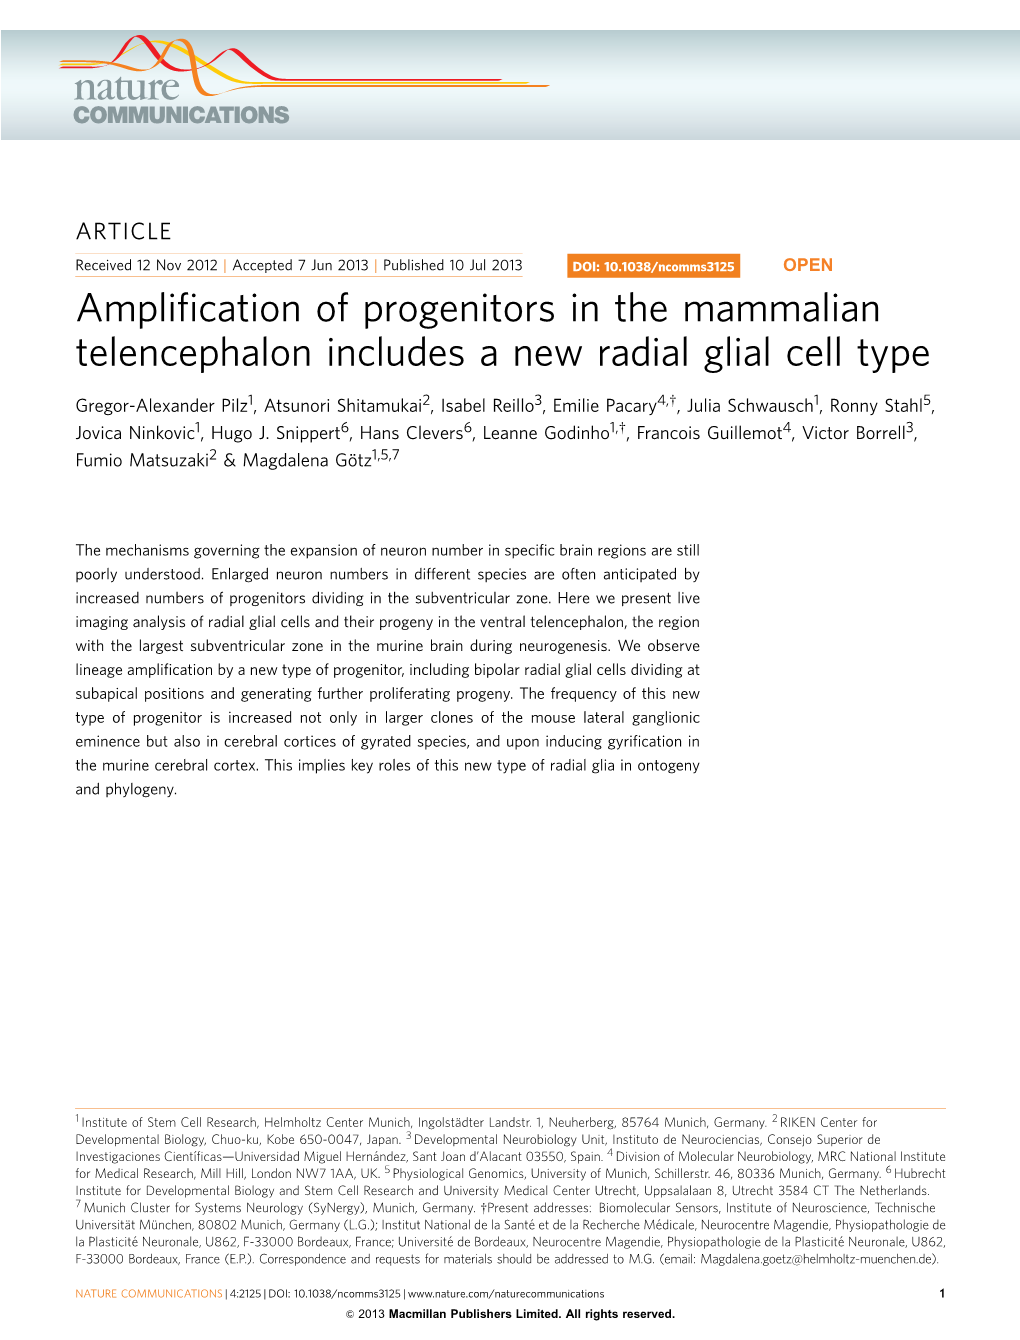 Amplification of Progenitors in the Mammalian Telencephalon Includes a New Radial Glial Cell Type